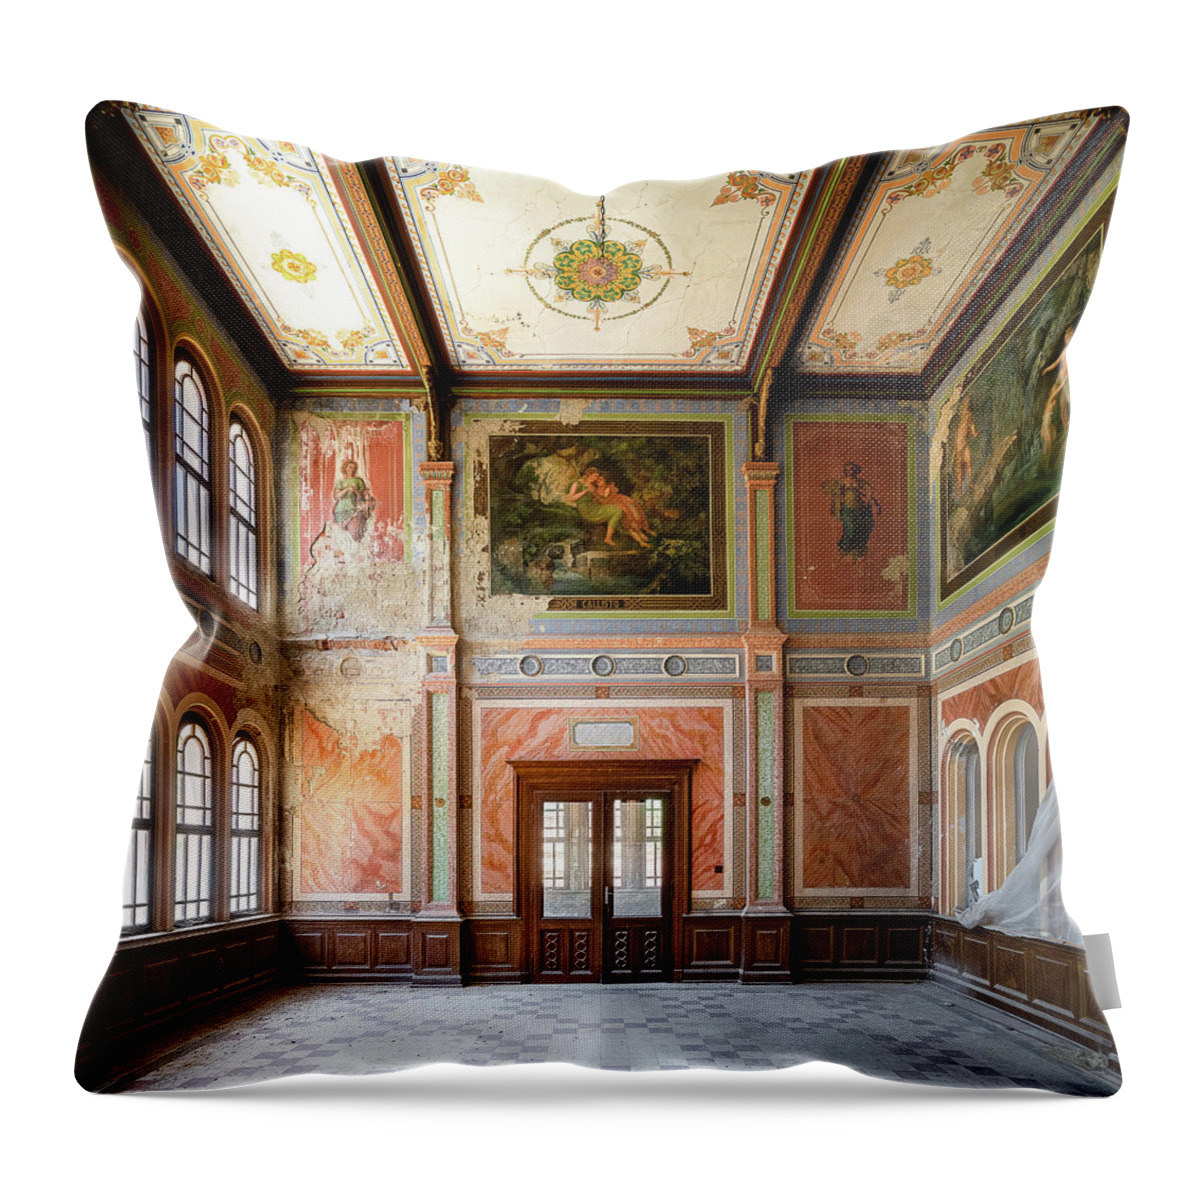 Urban Throw Pillow featuring the photograph Abandoned Casino in Decay by Roman Robroek